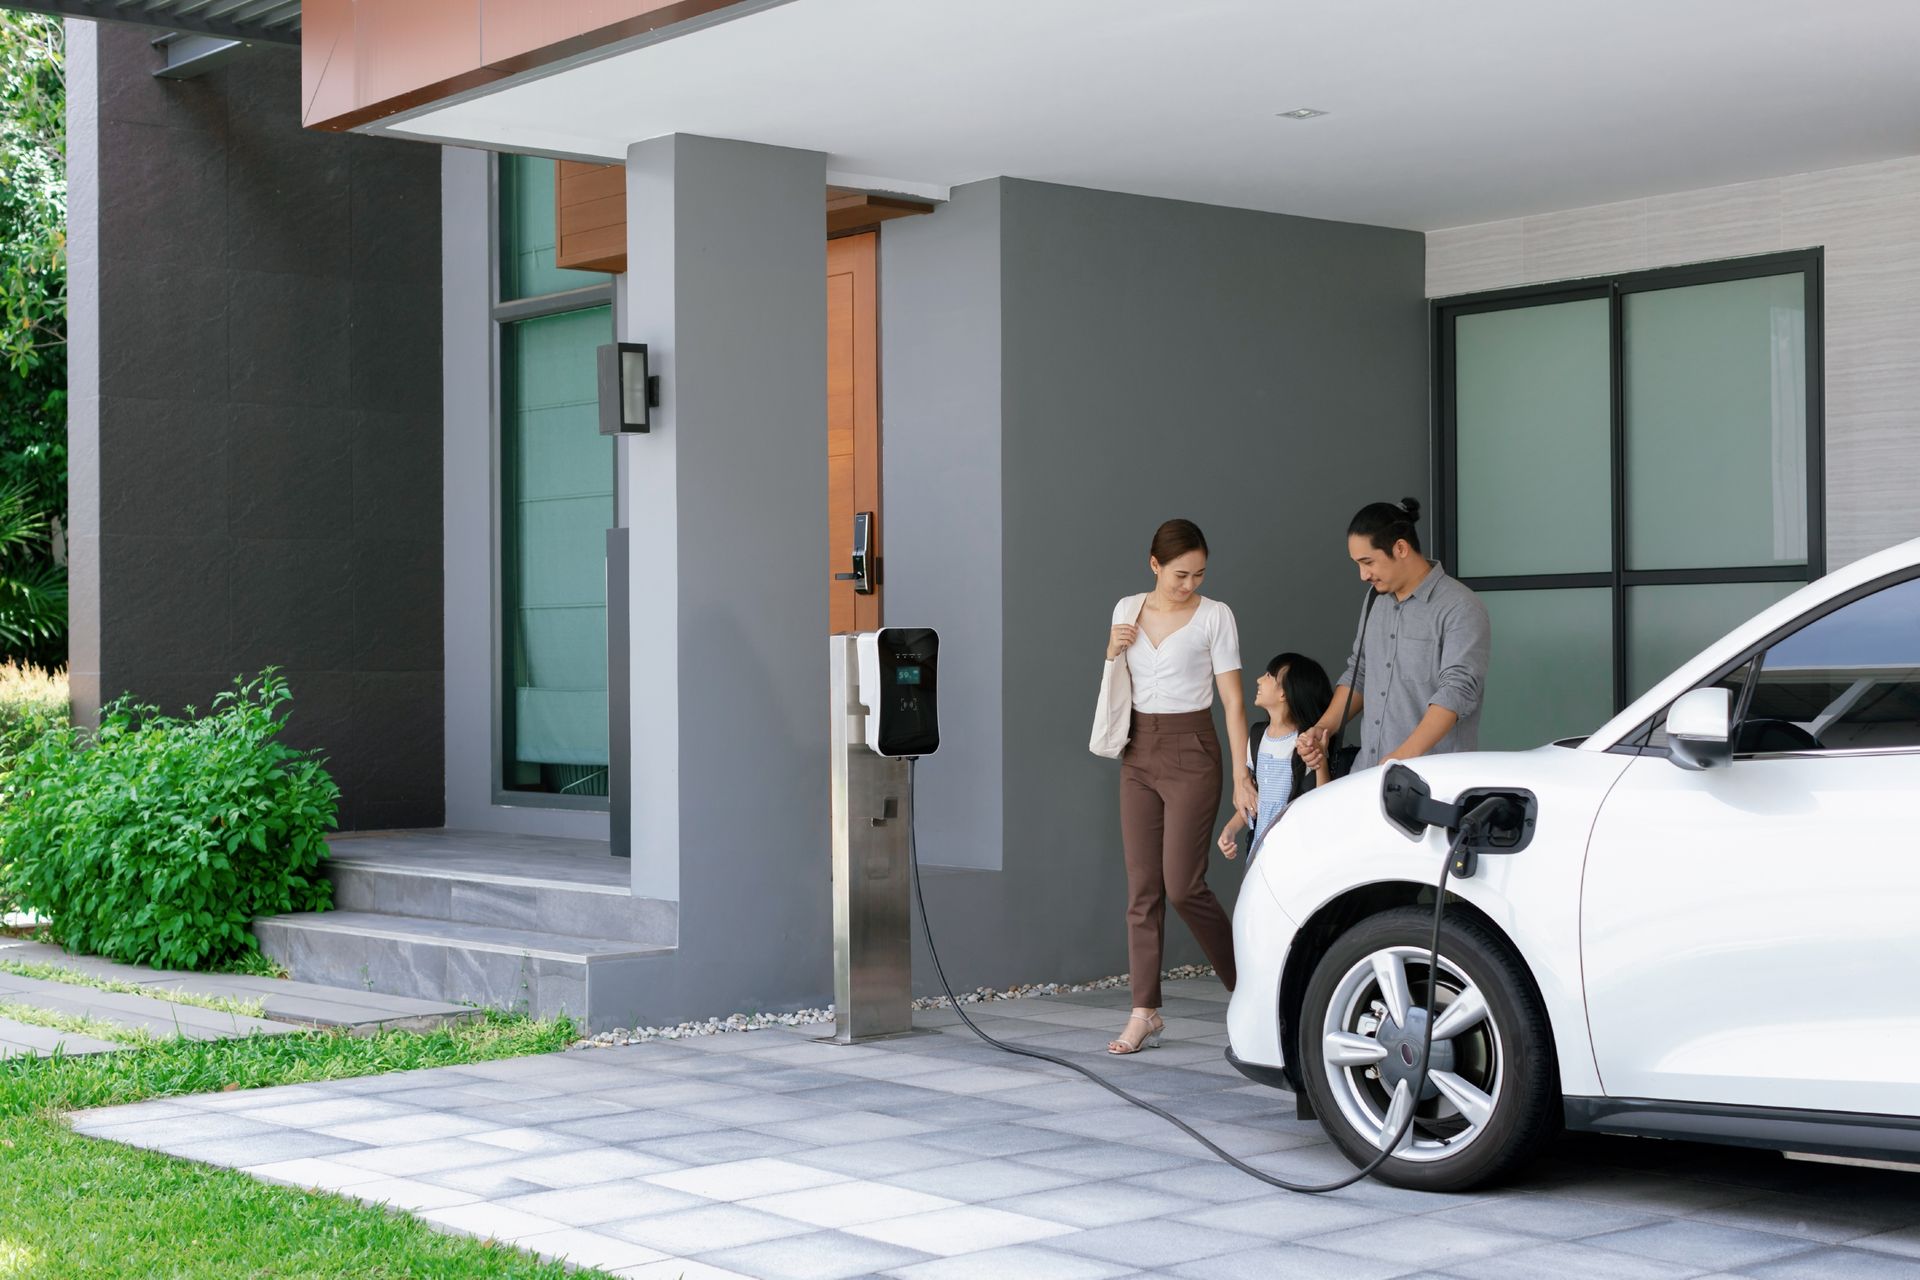 two electric vehicle charging stations are sitting in front of a building .